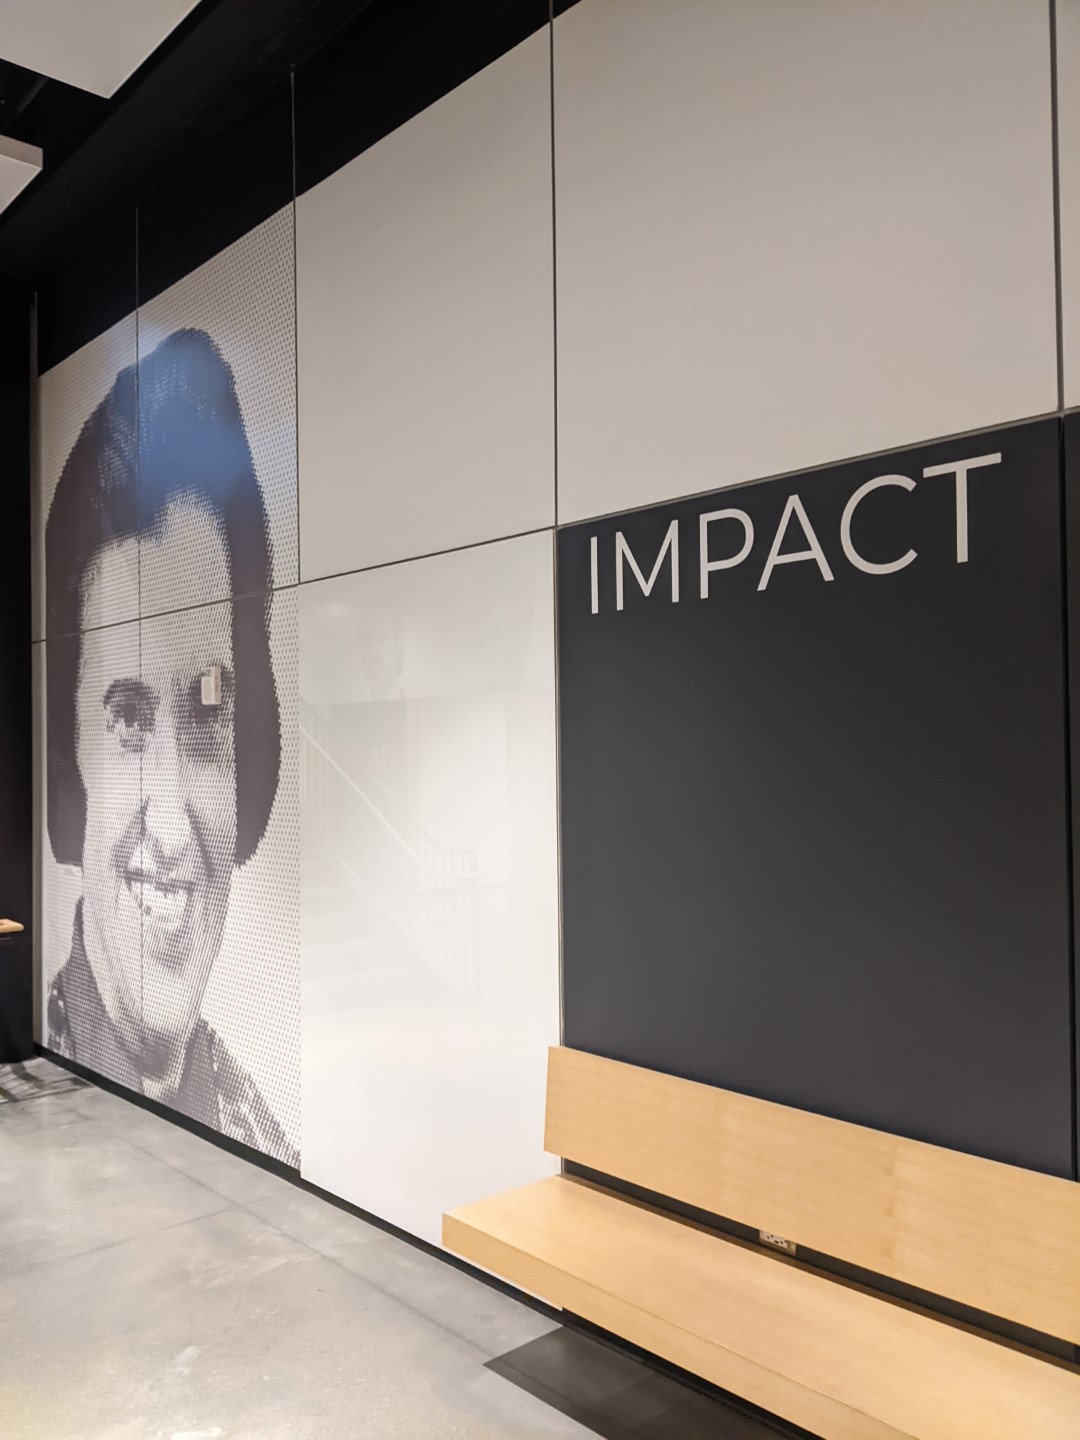 A series of light gray panels on a wall that depict a grayscale pixelated image of a woman on one side. One panel is black with the word IMPACT in white lettering.